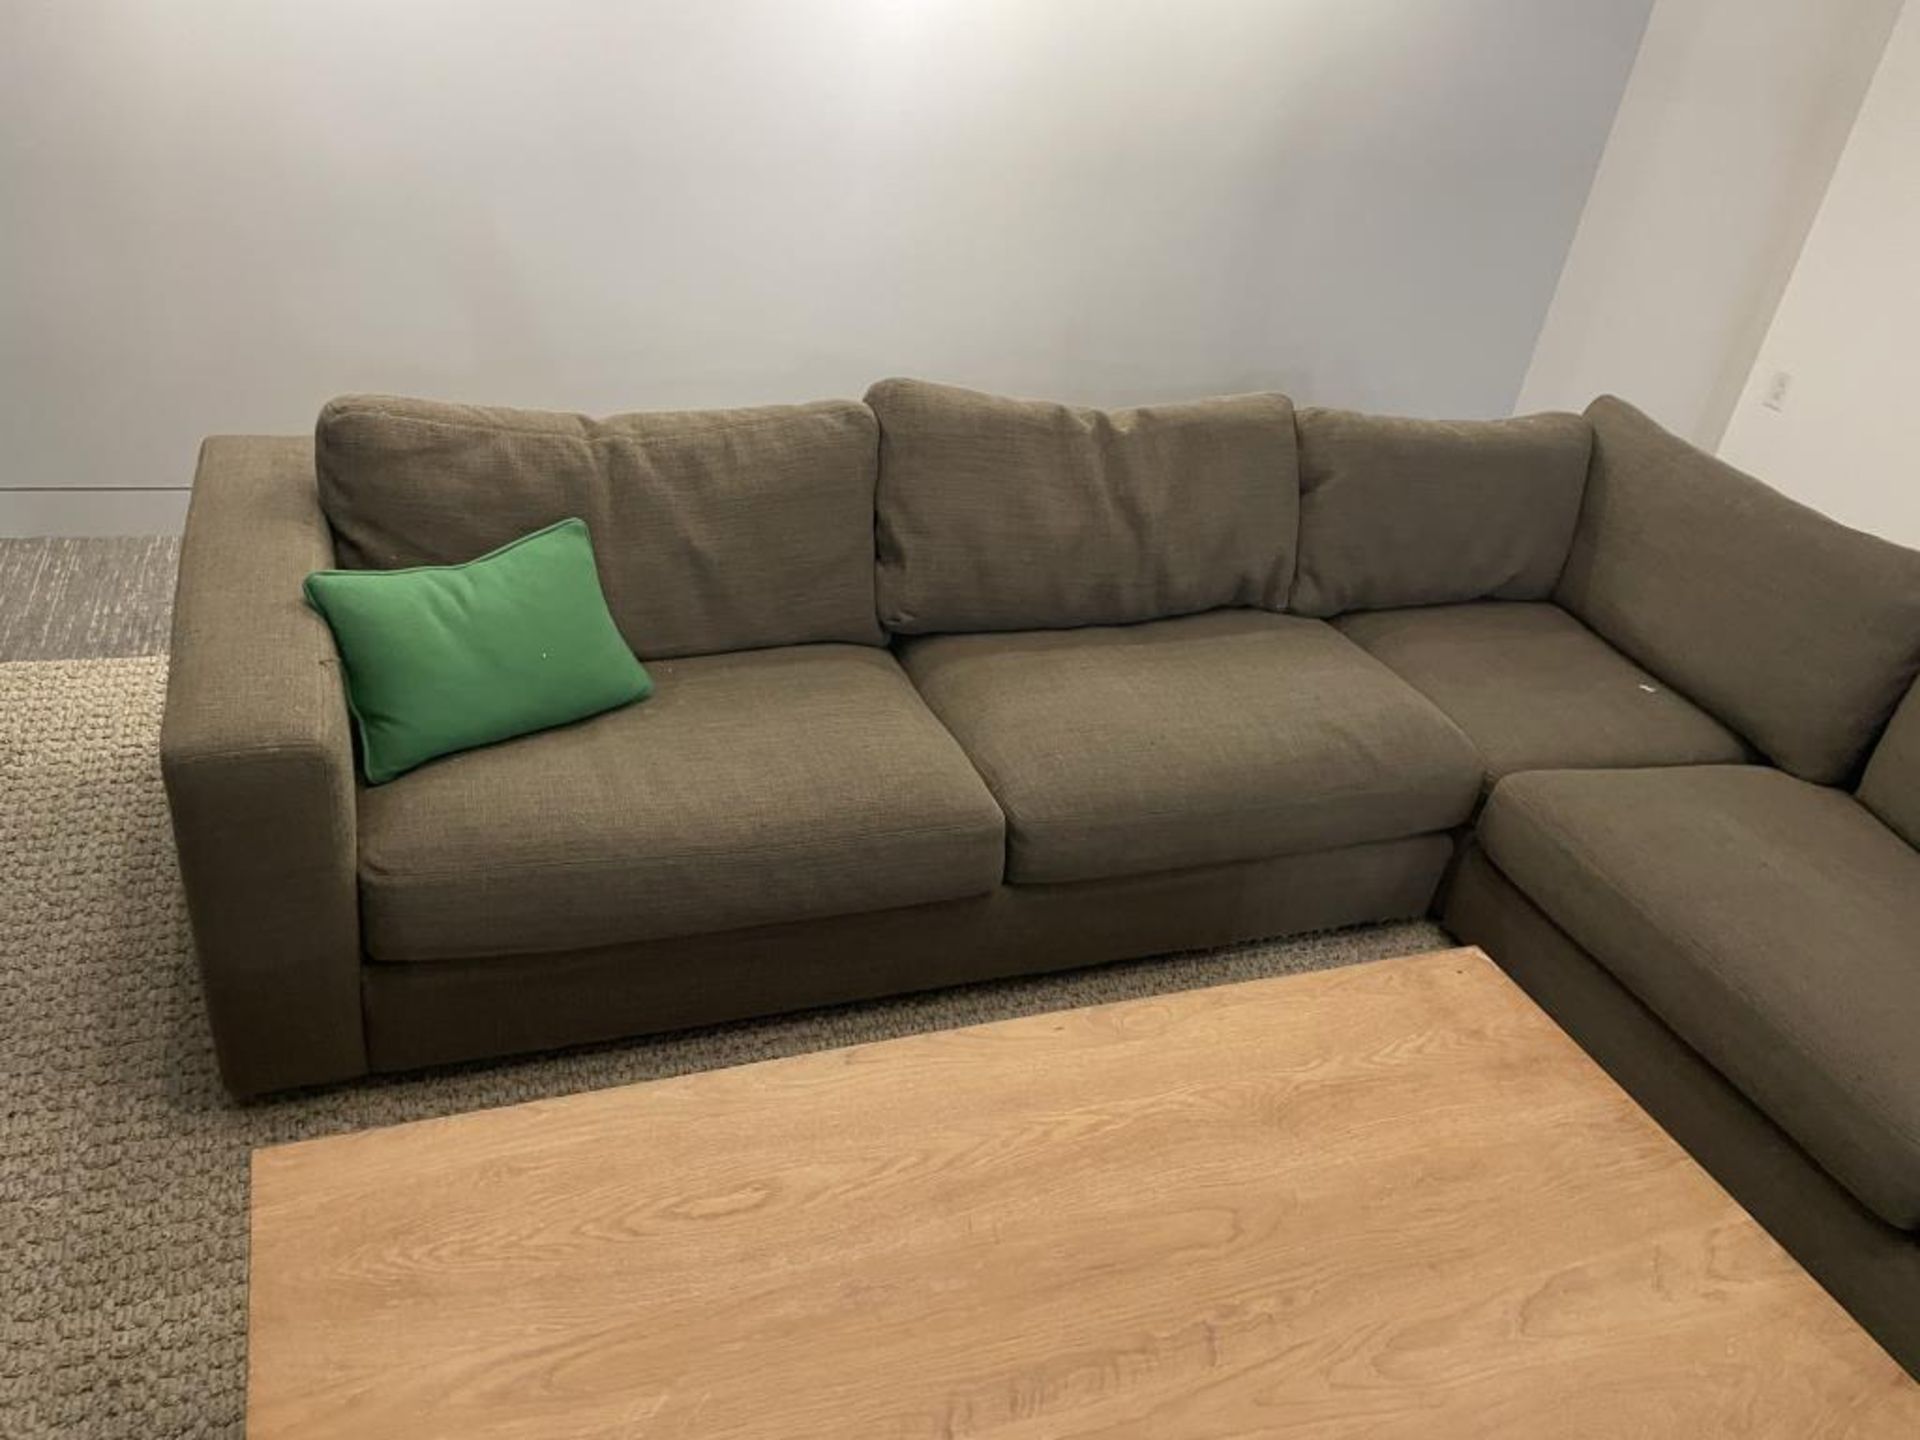 3-Sectional DWR L-Shape Couch w/ OHIO Coffee Table - Image 2 of 6